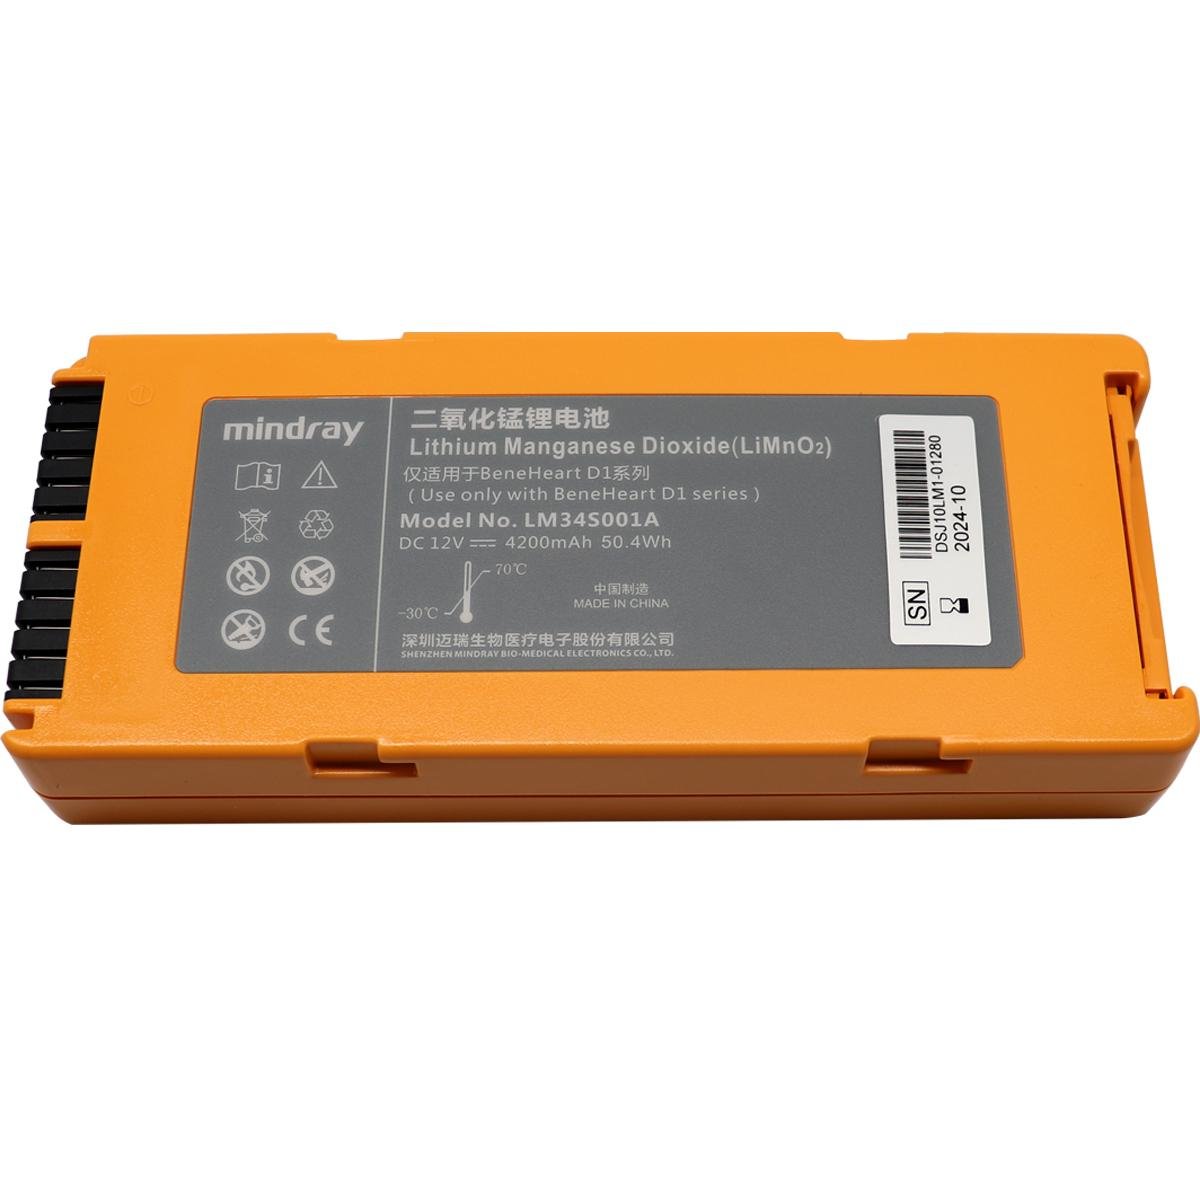 Mindray LM34S001A aed defibrillator batteries LiMnO2 12V 4200mAh